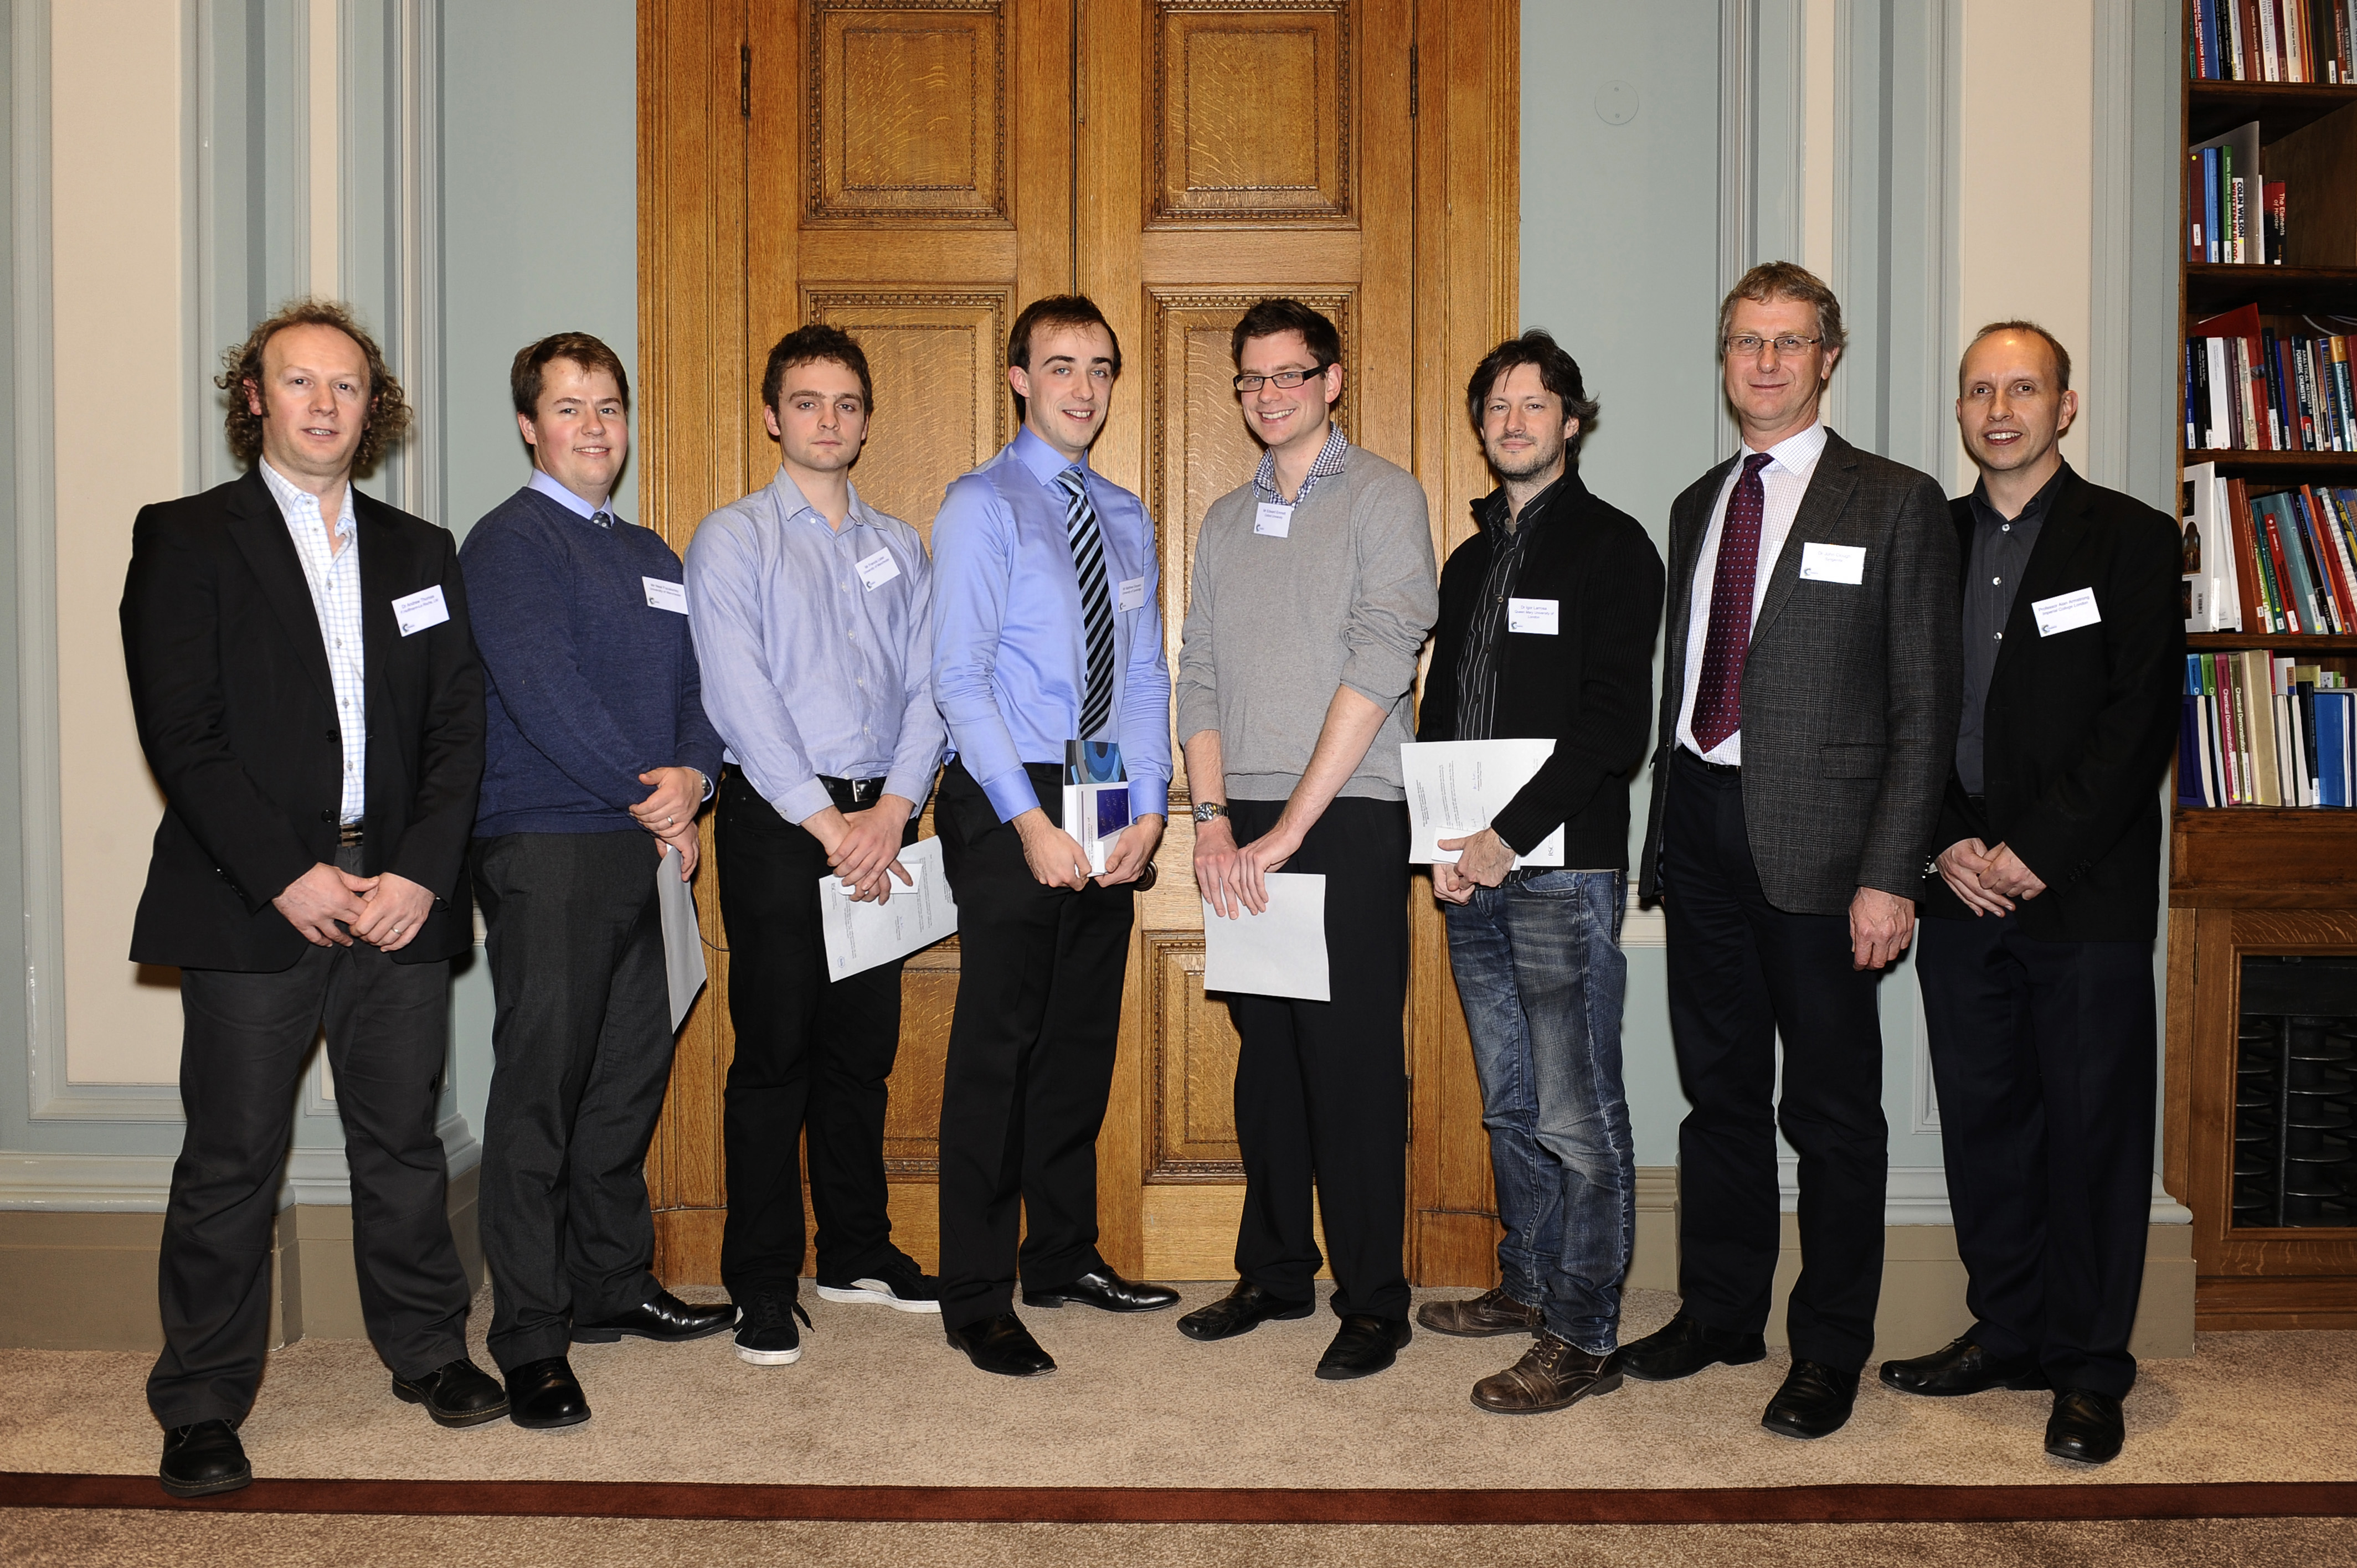 Winners of the RSC Organic Division Poster Symposium 2013